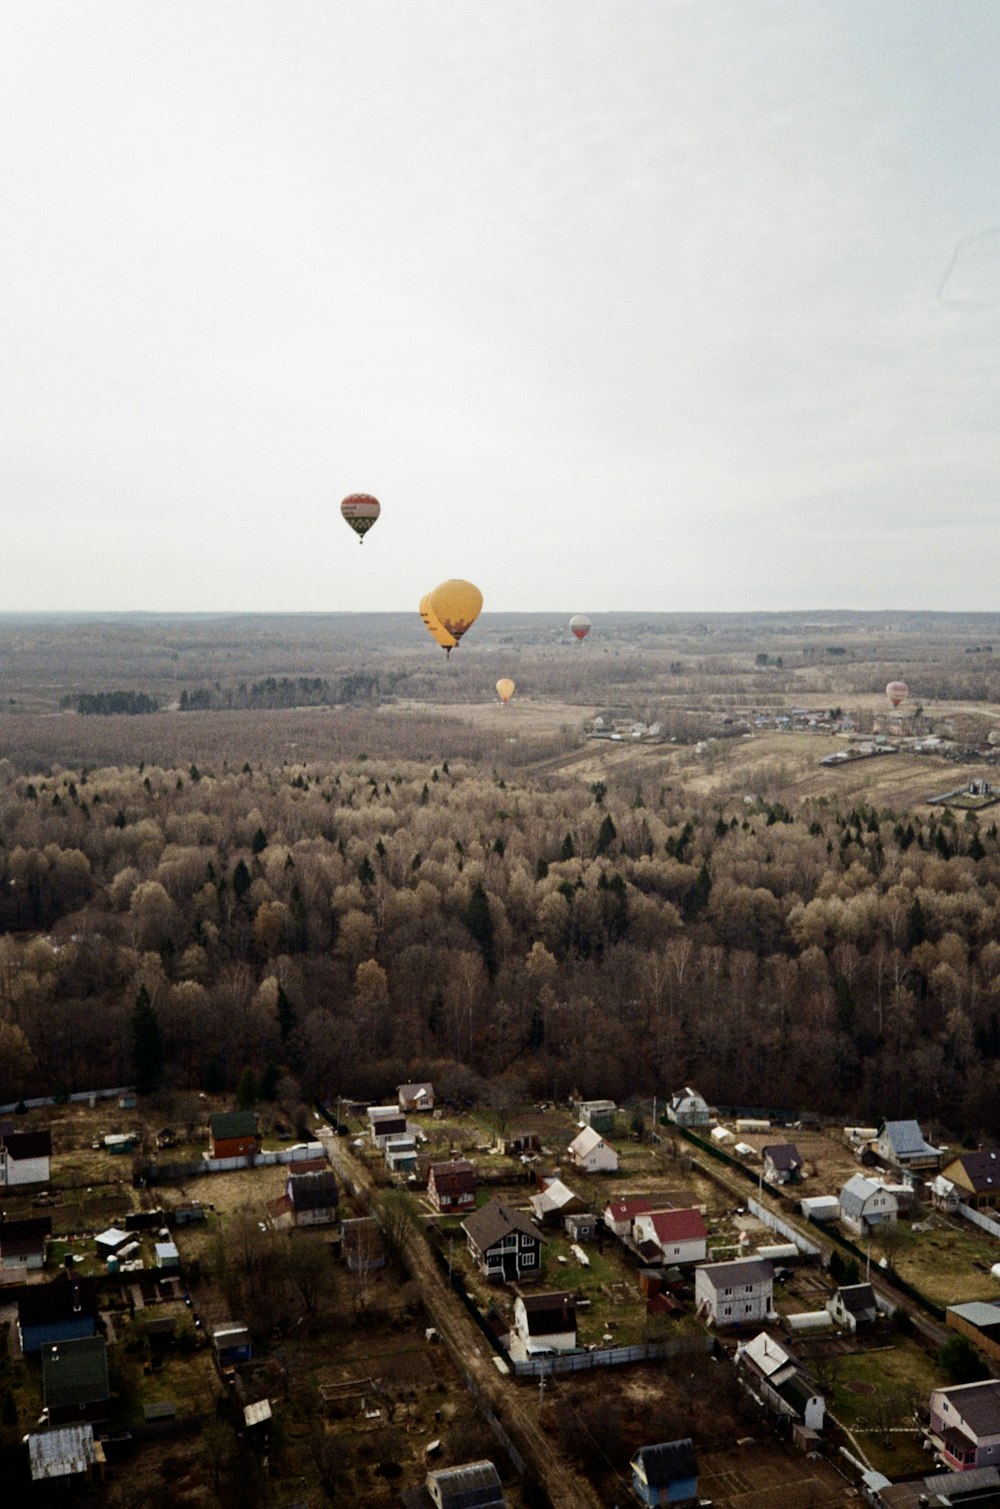 a group of hot air balloons over a city